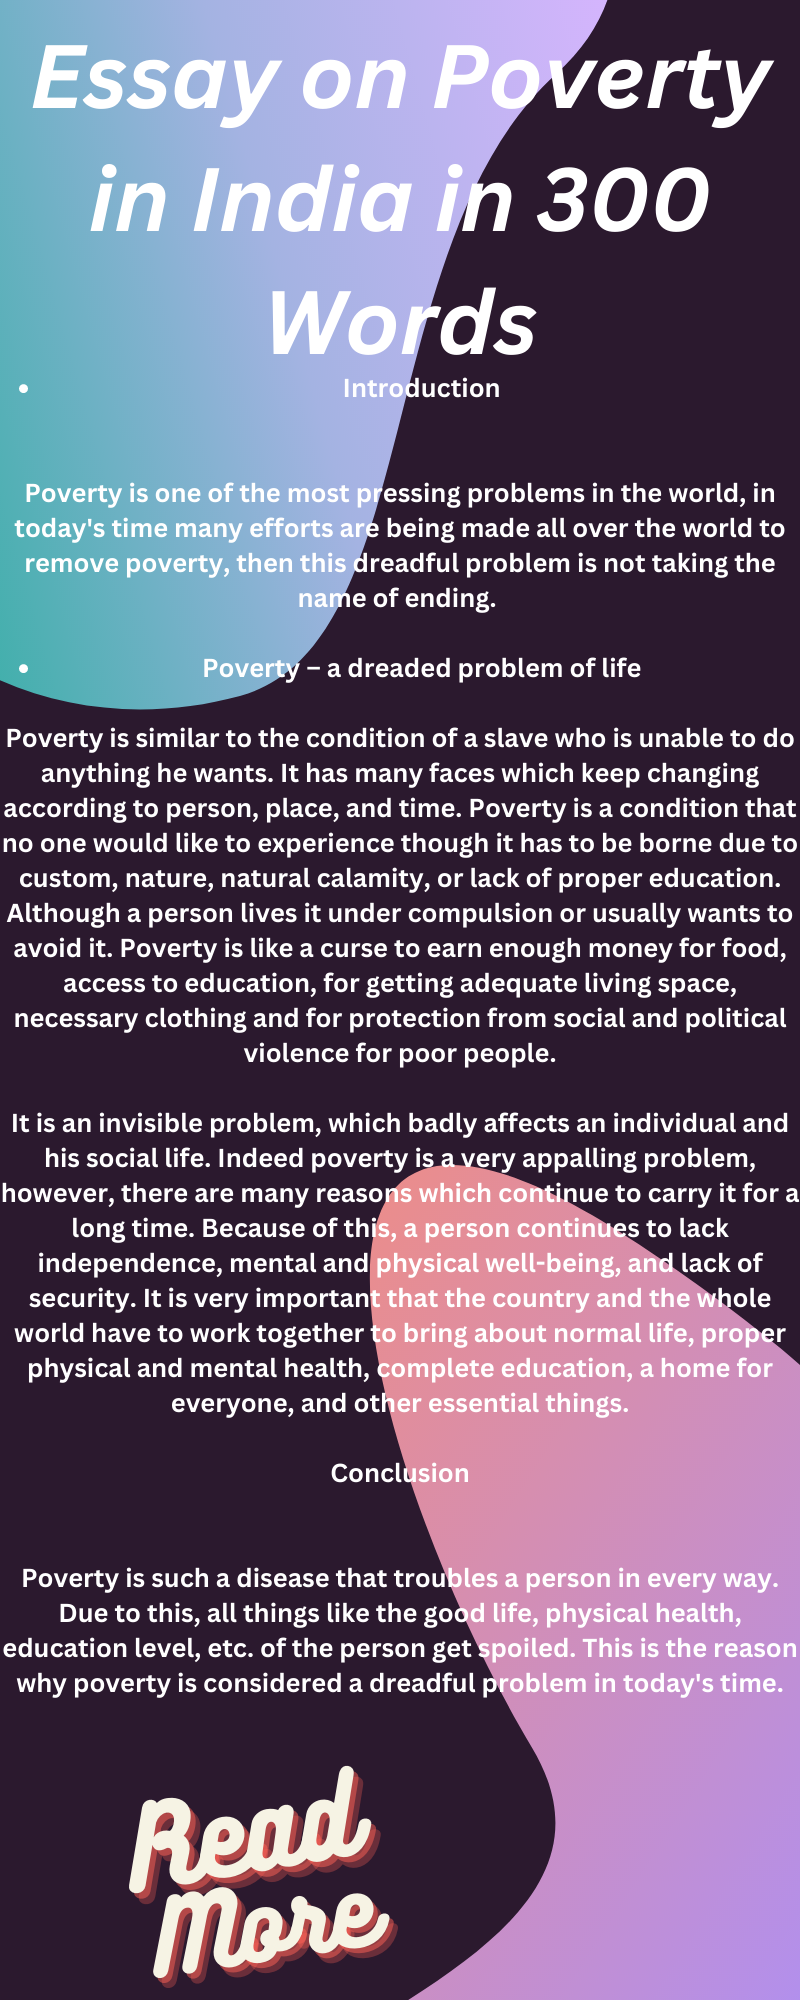 Essay on Poverty in India in 300 Words